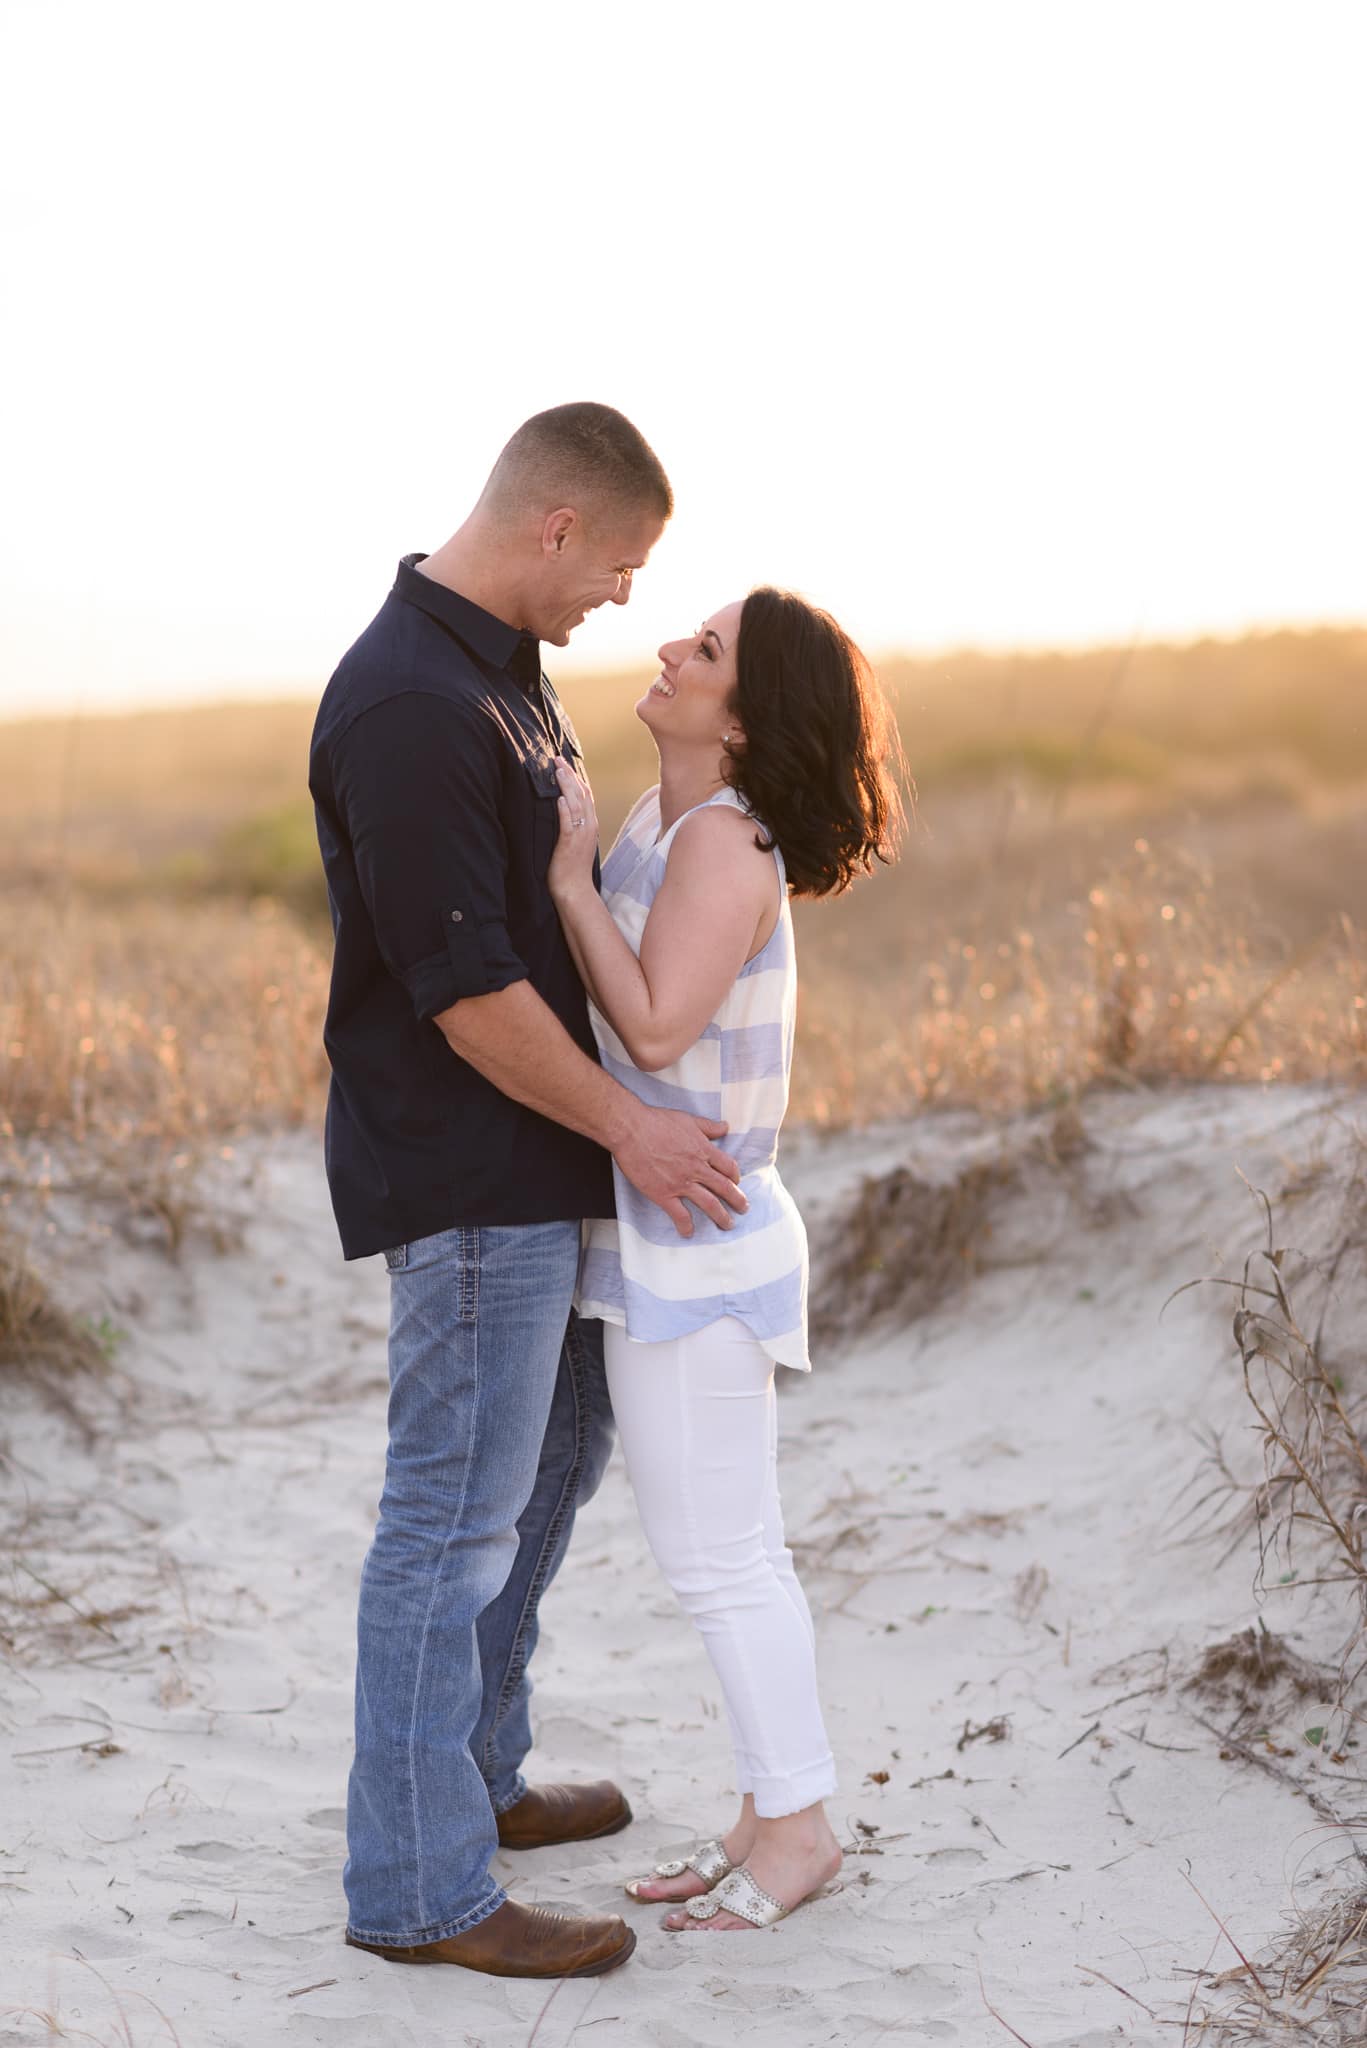 Romantic engagement portraits in front of the sea oats - Huntington State Park